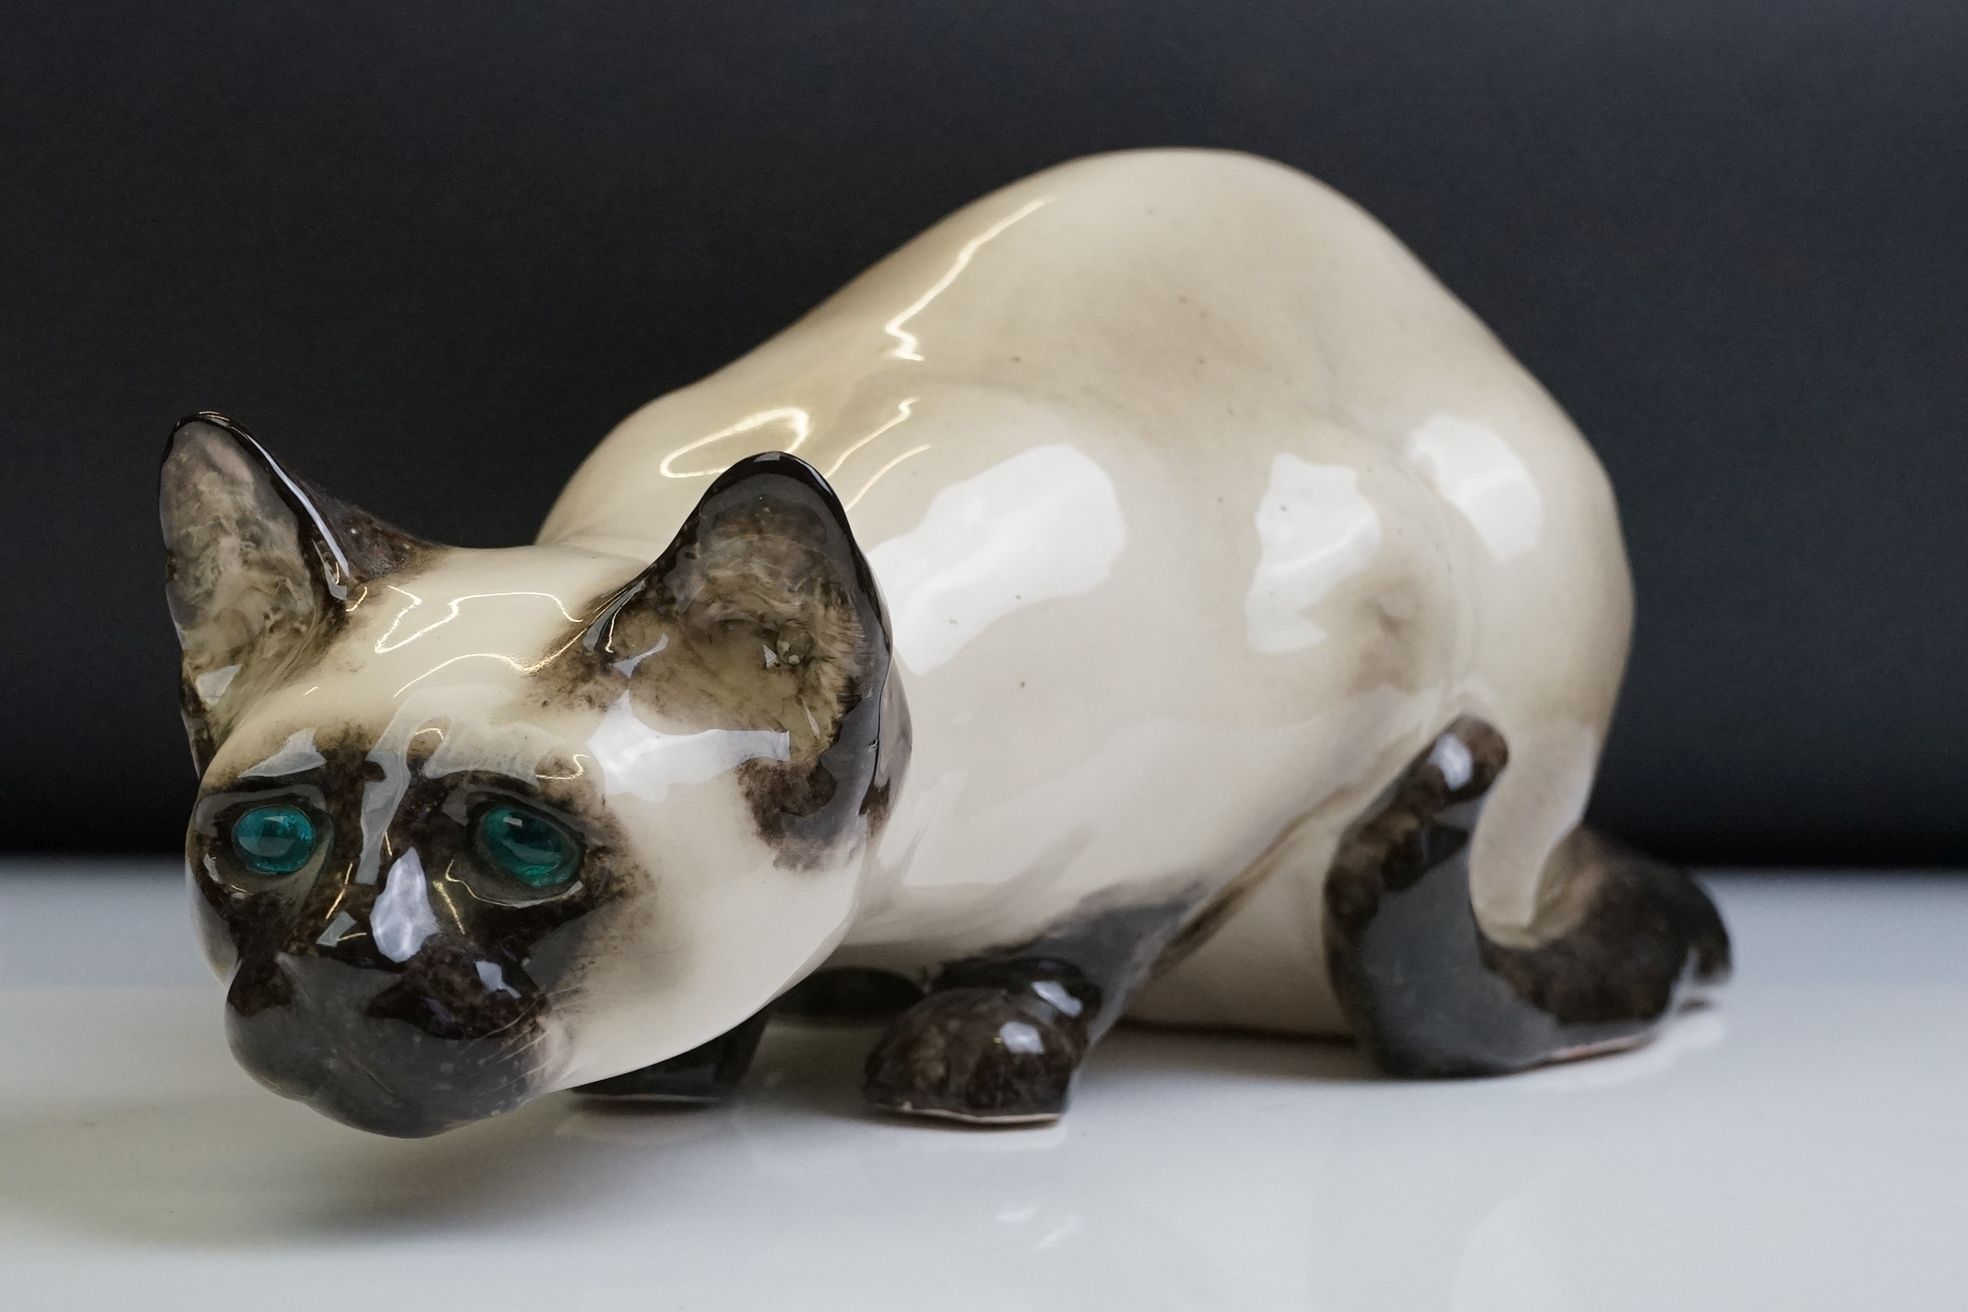 Winstanley pottery figure of a crouching Siamese cat with blue glass eyes, signed to the base and